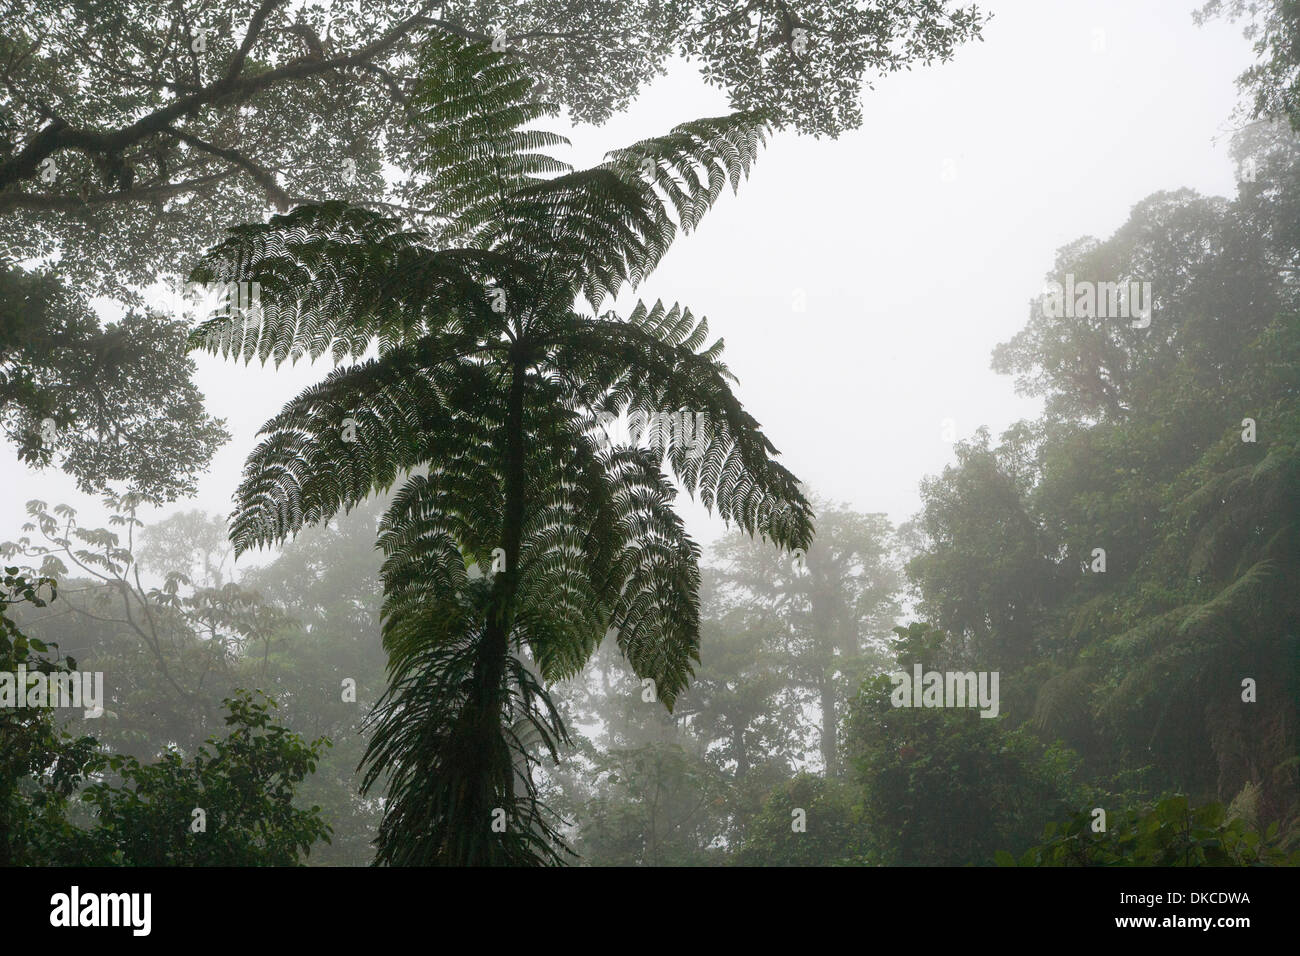 Monteverde Cloud forest of Costa Rica. Stock Photo